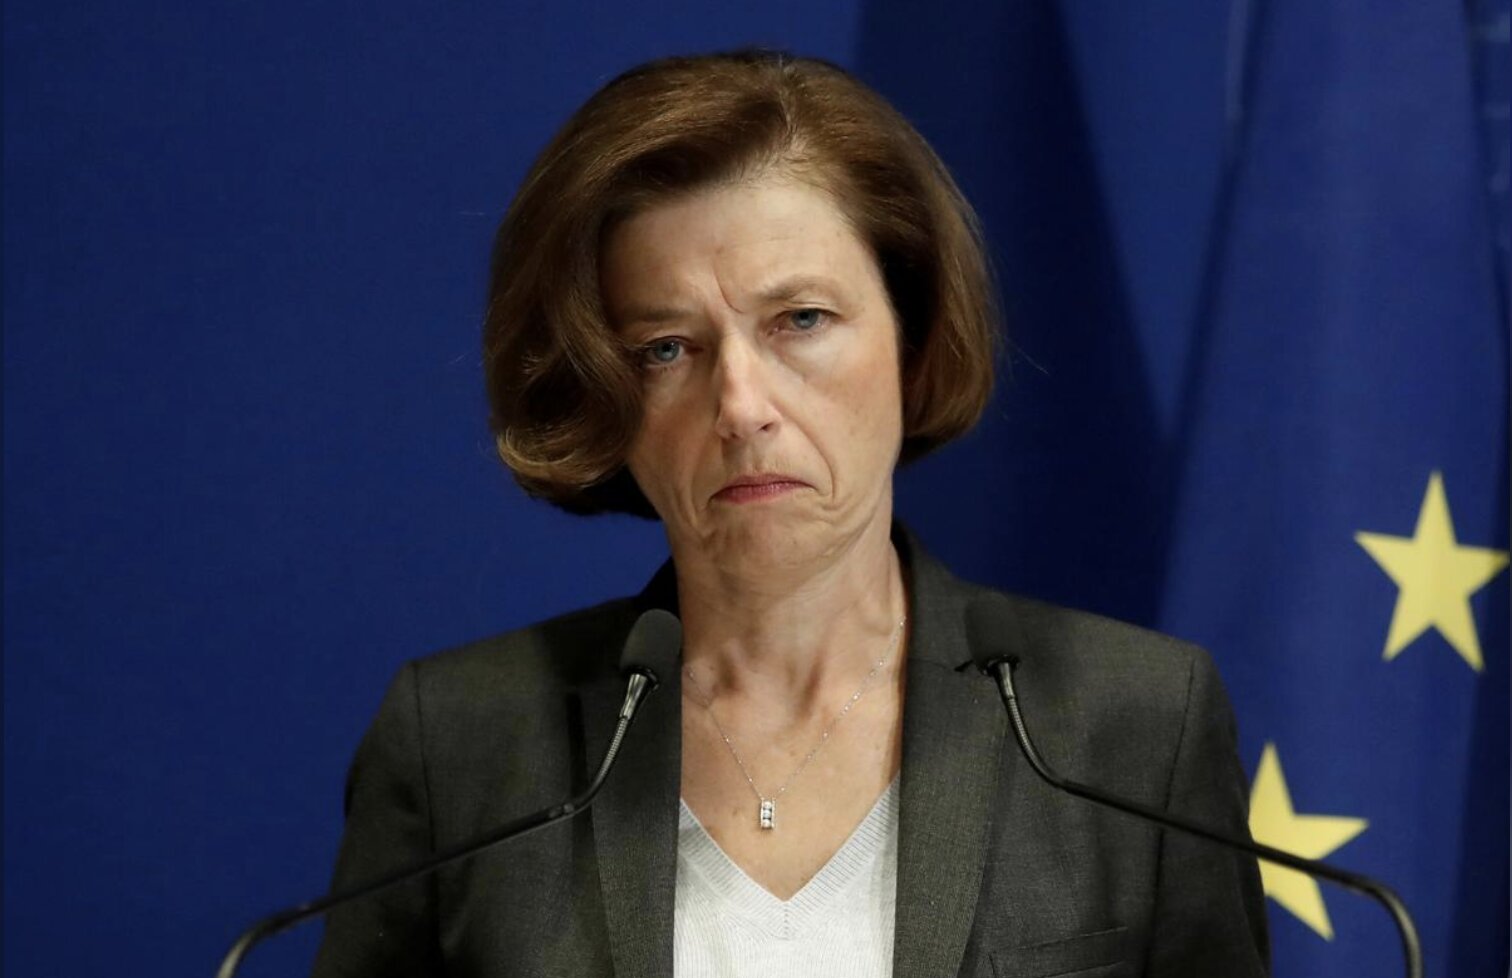 France stands by Greece over tensions in Aegean Sea: French defense minister